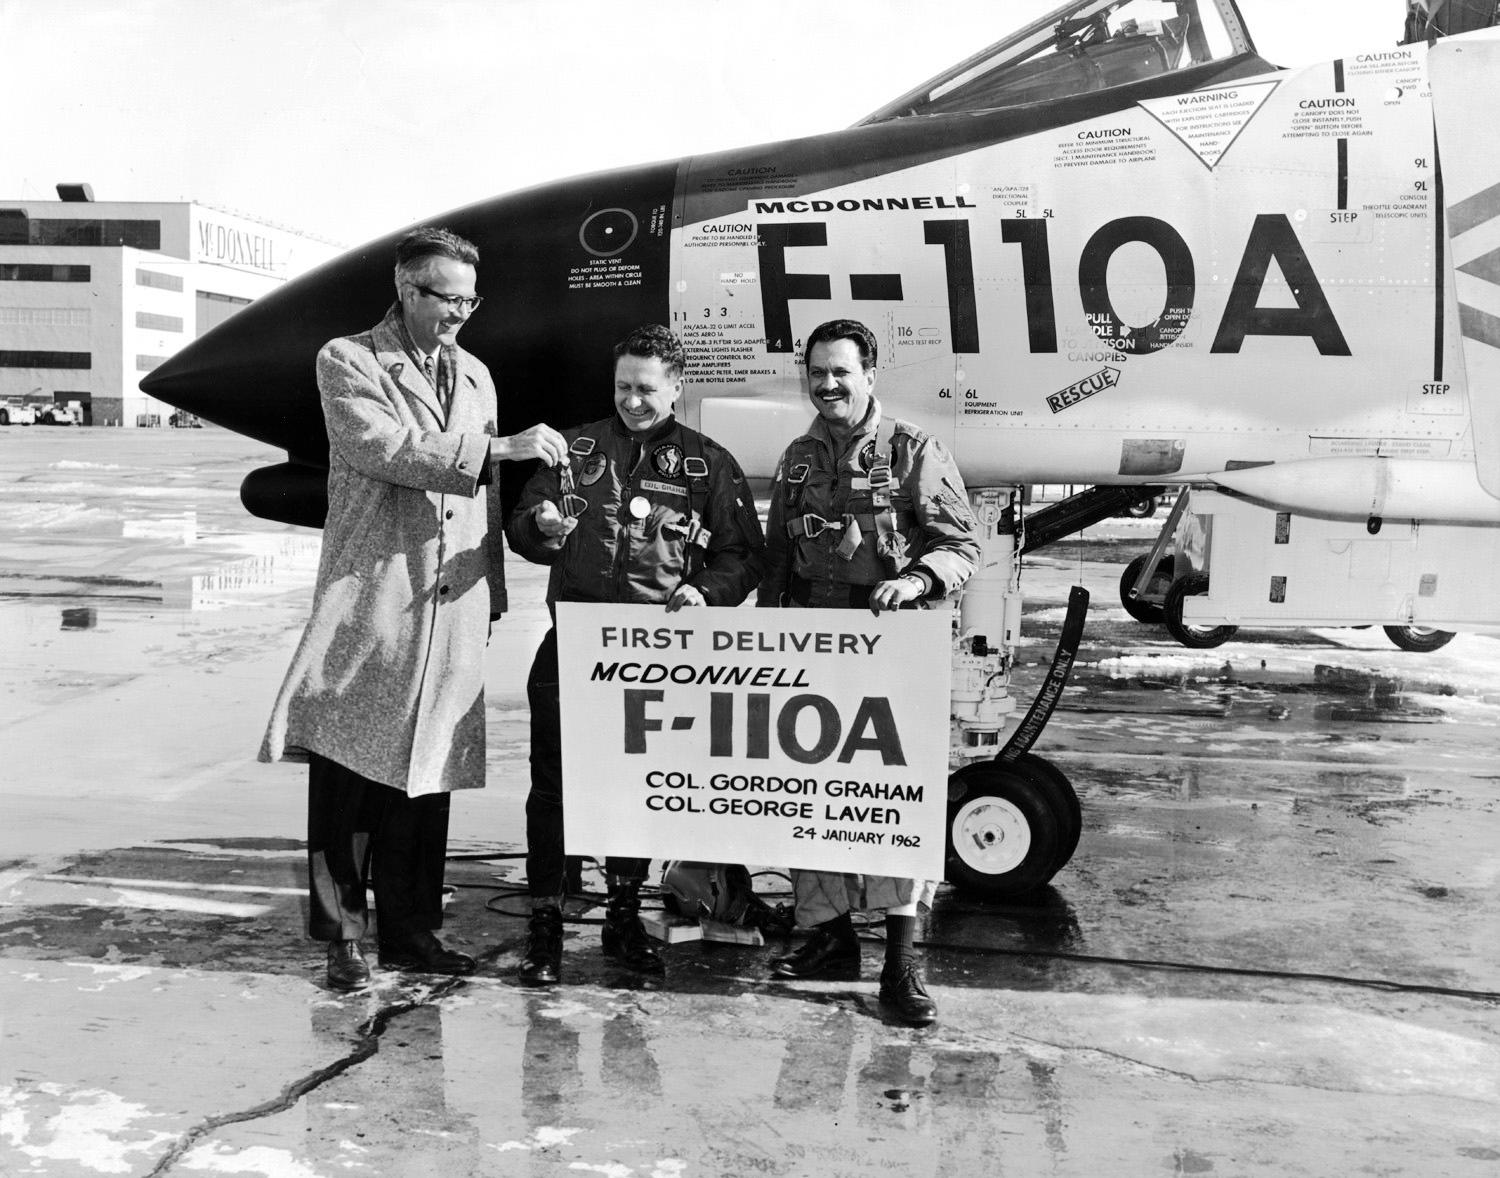 Sanford N. ("Sandy") McDonnell hands over the keys to the first F-110A Spectre to the United States Air Force, St. Louis, Missouri, 24 January 1962. (McDonnell Aircraft Corporation)